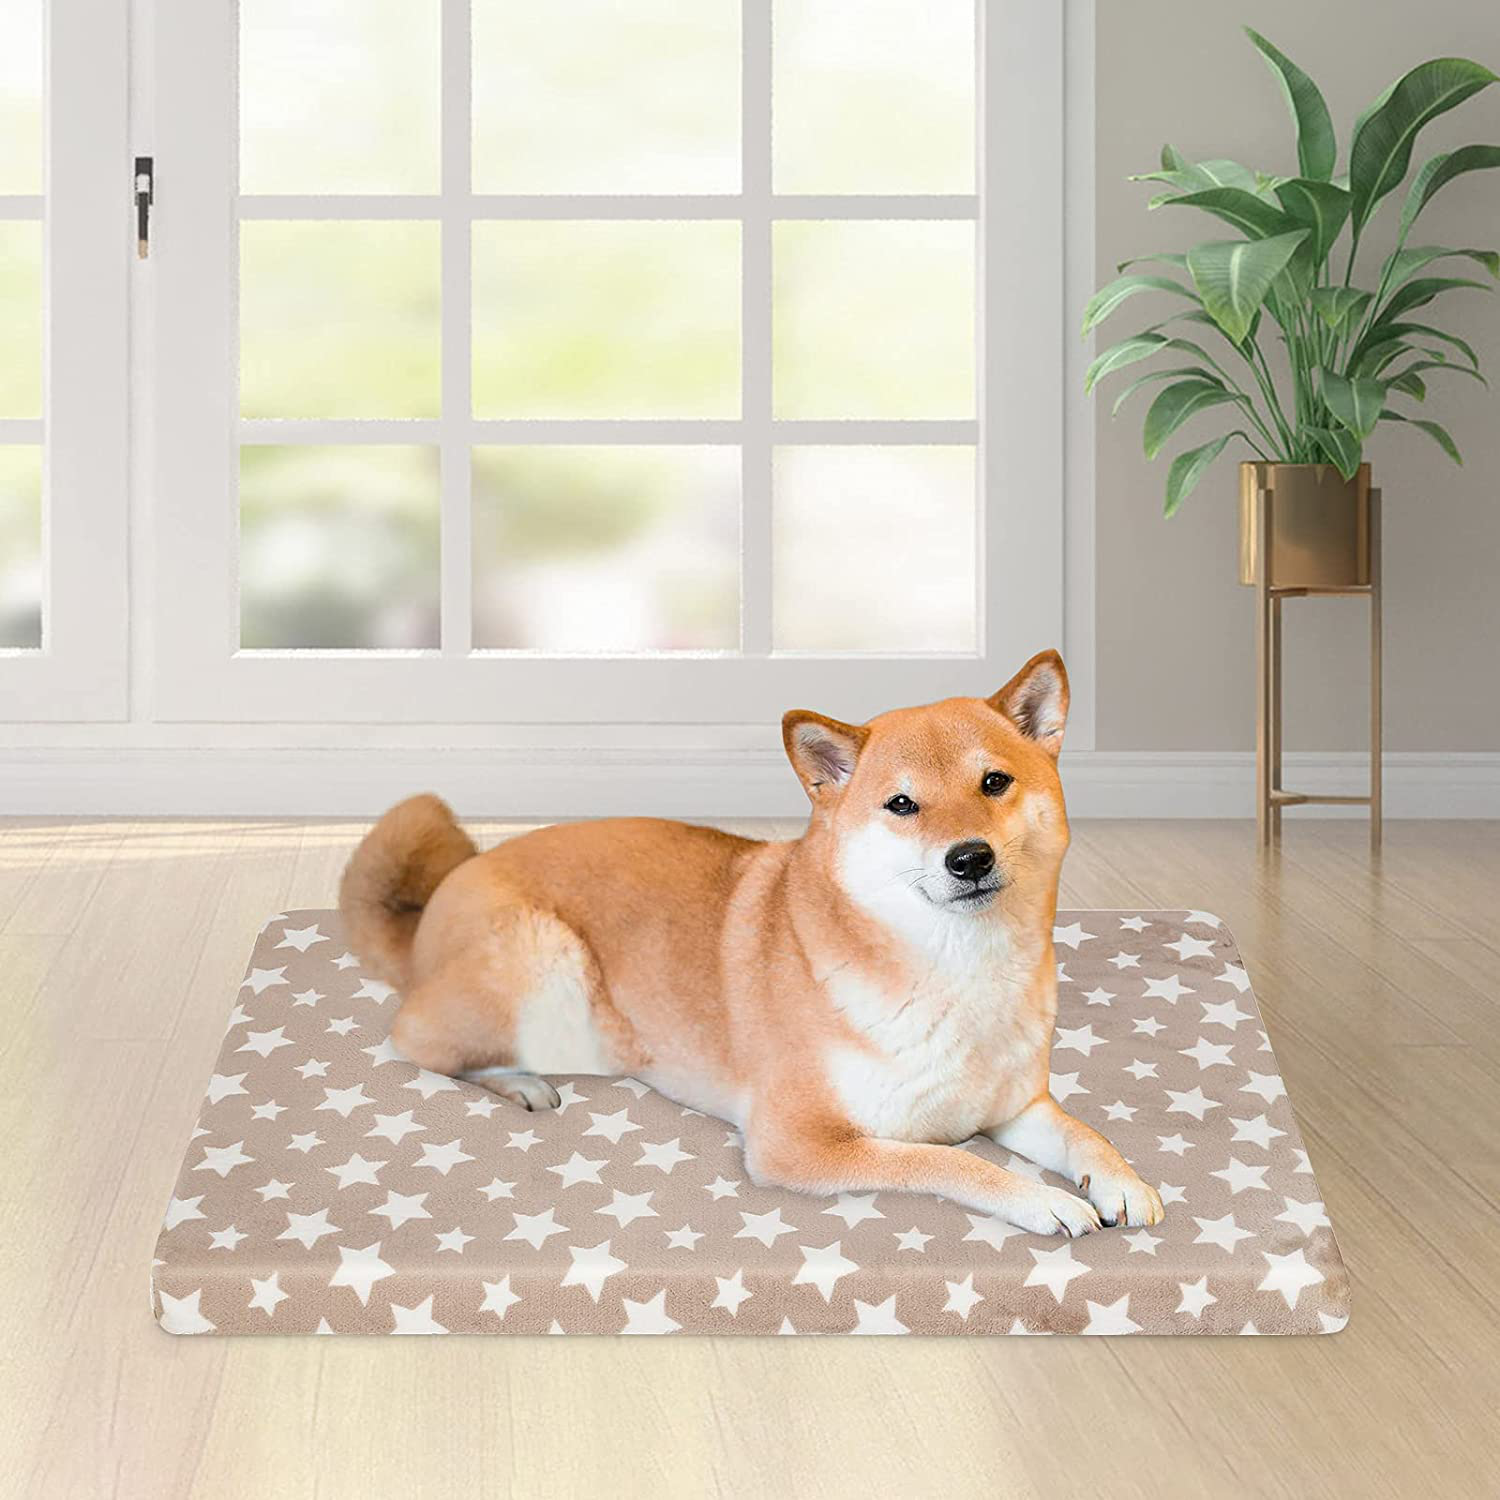 EMPSIGN Waterproof Dog Bed Crate Pad, Dog Bed Mat Reversible (Warm & Cool), Removable Washable Cover, Waterproof Liner & High Density Foam, Pet Bed Mattress for Small to Xx-Large Dogs, Beige, Star